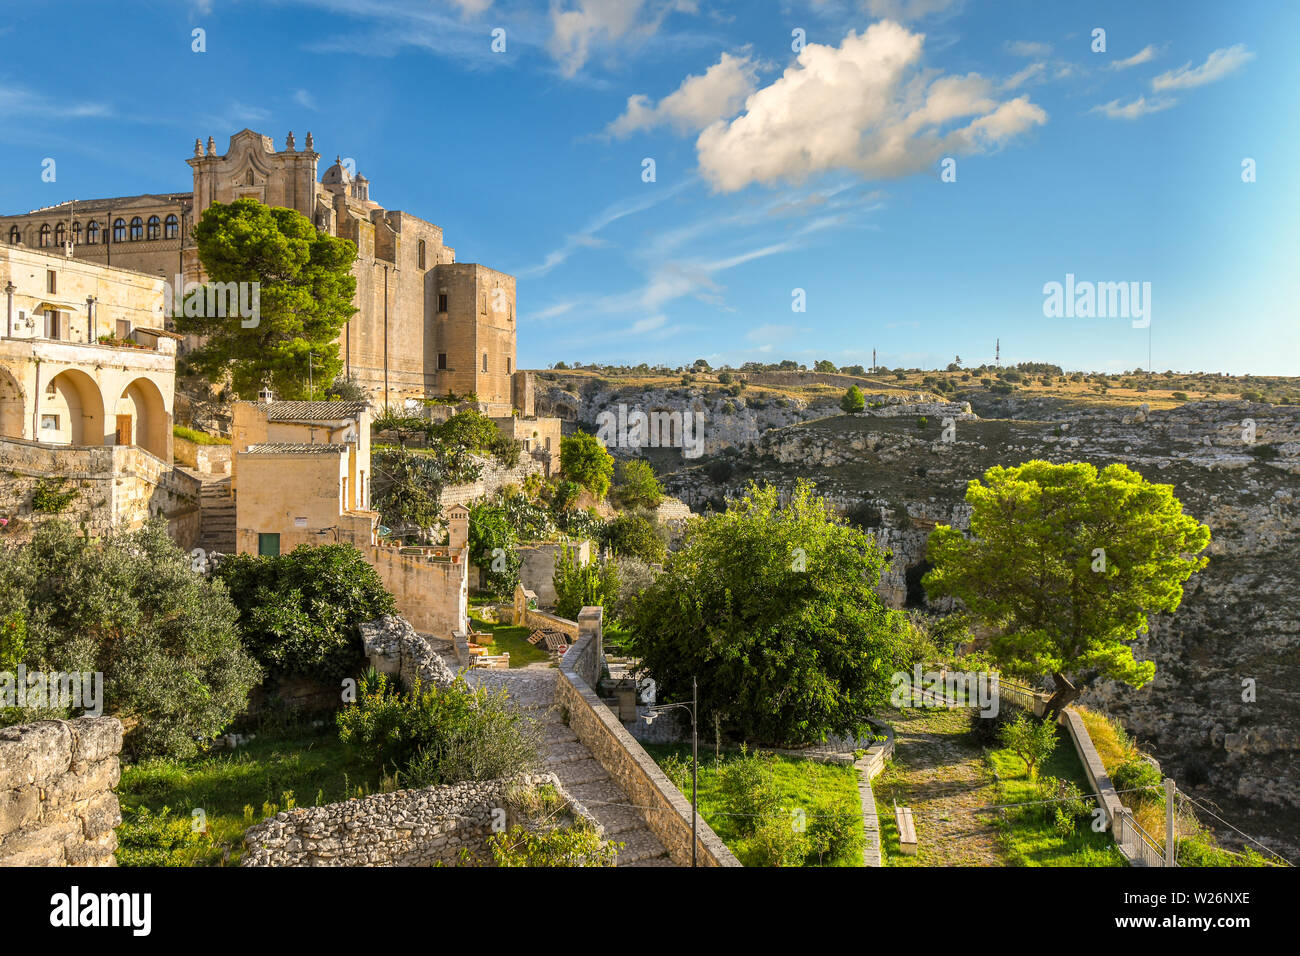 A garden near the Convent of Saint Agostino, overlooking the deep ravine and opposite the sassi cave dwellings in the ancient city of Matera, Italy. Stock Photo